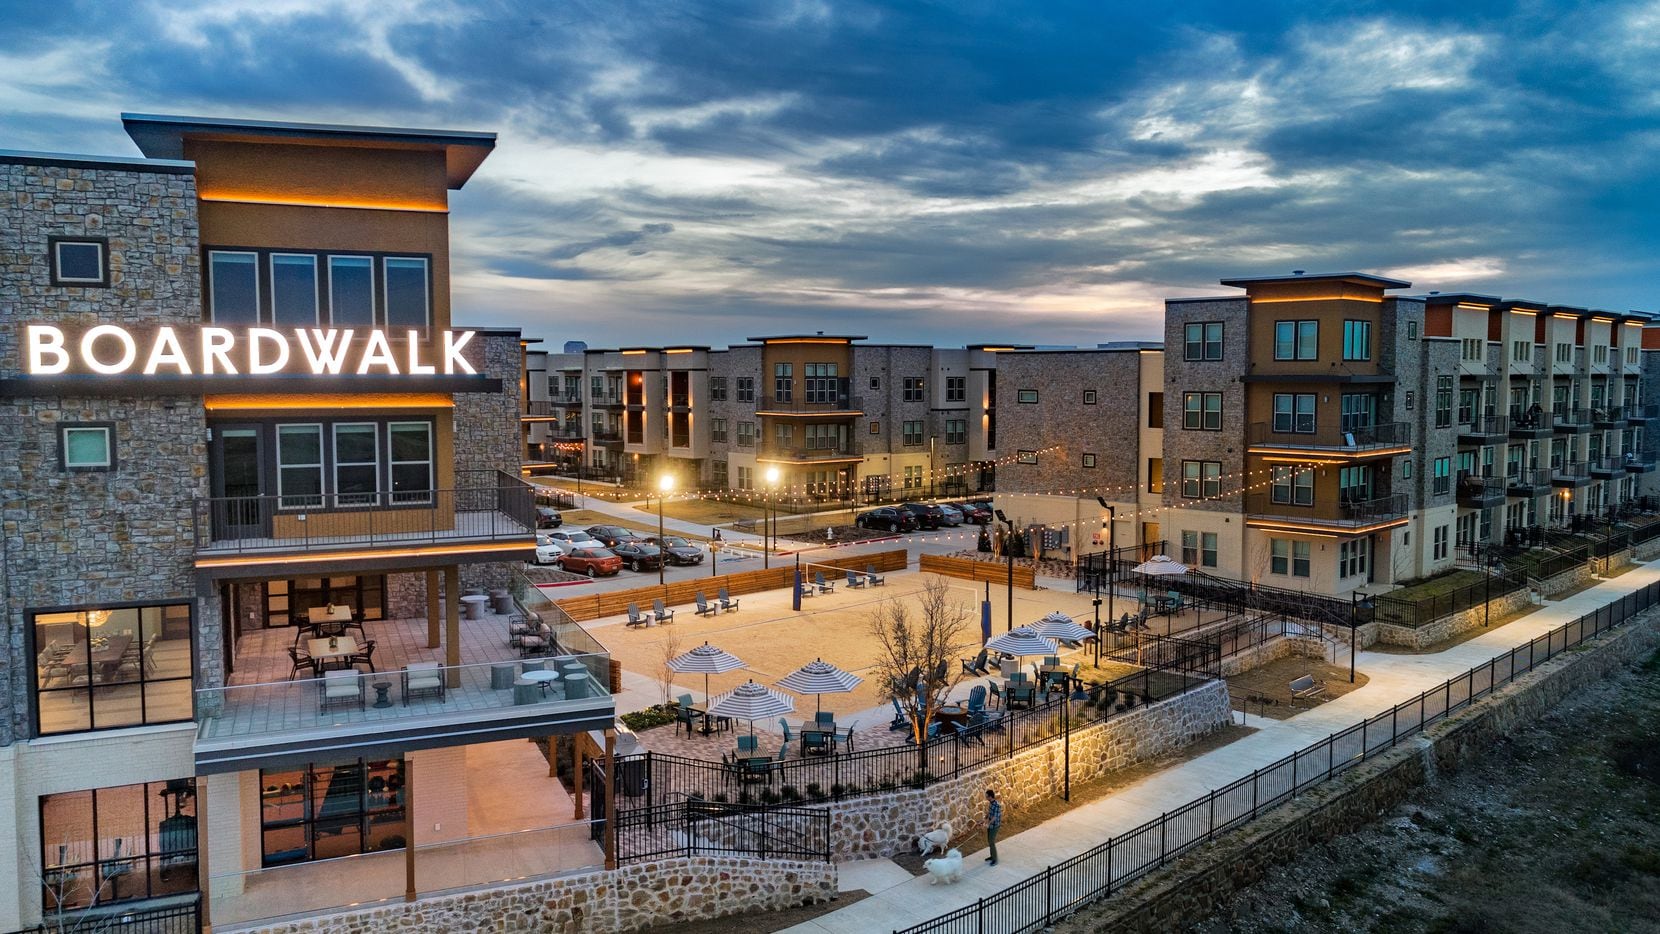 JPI has built thousands of North Texas apartments, including the Jefferson Boardwalk...